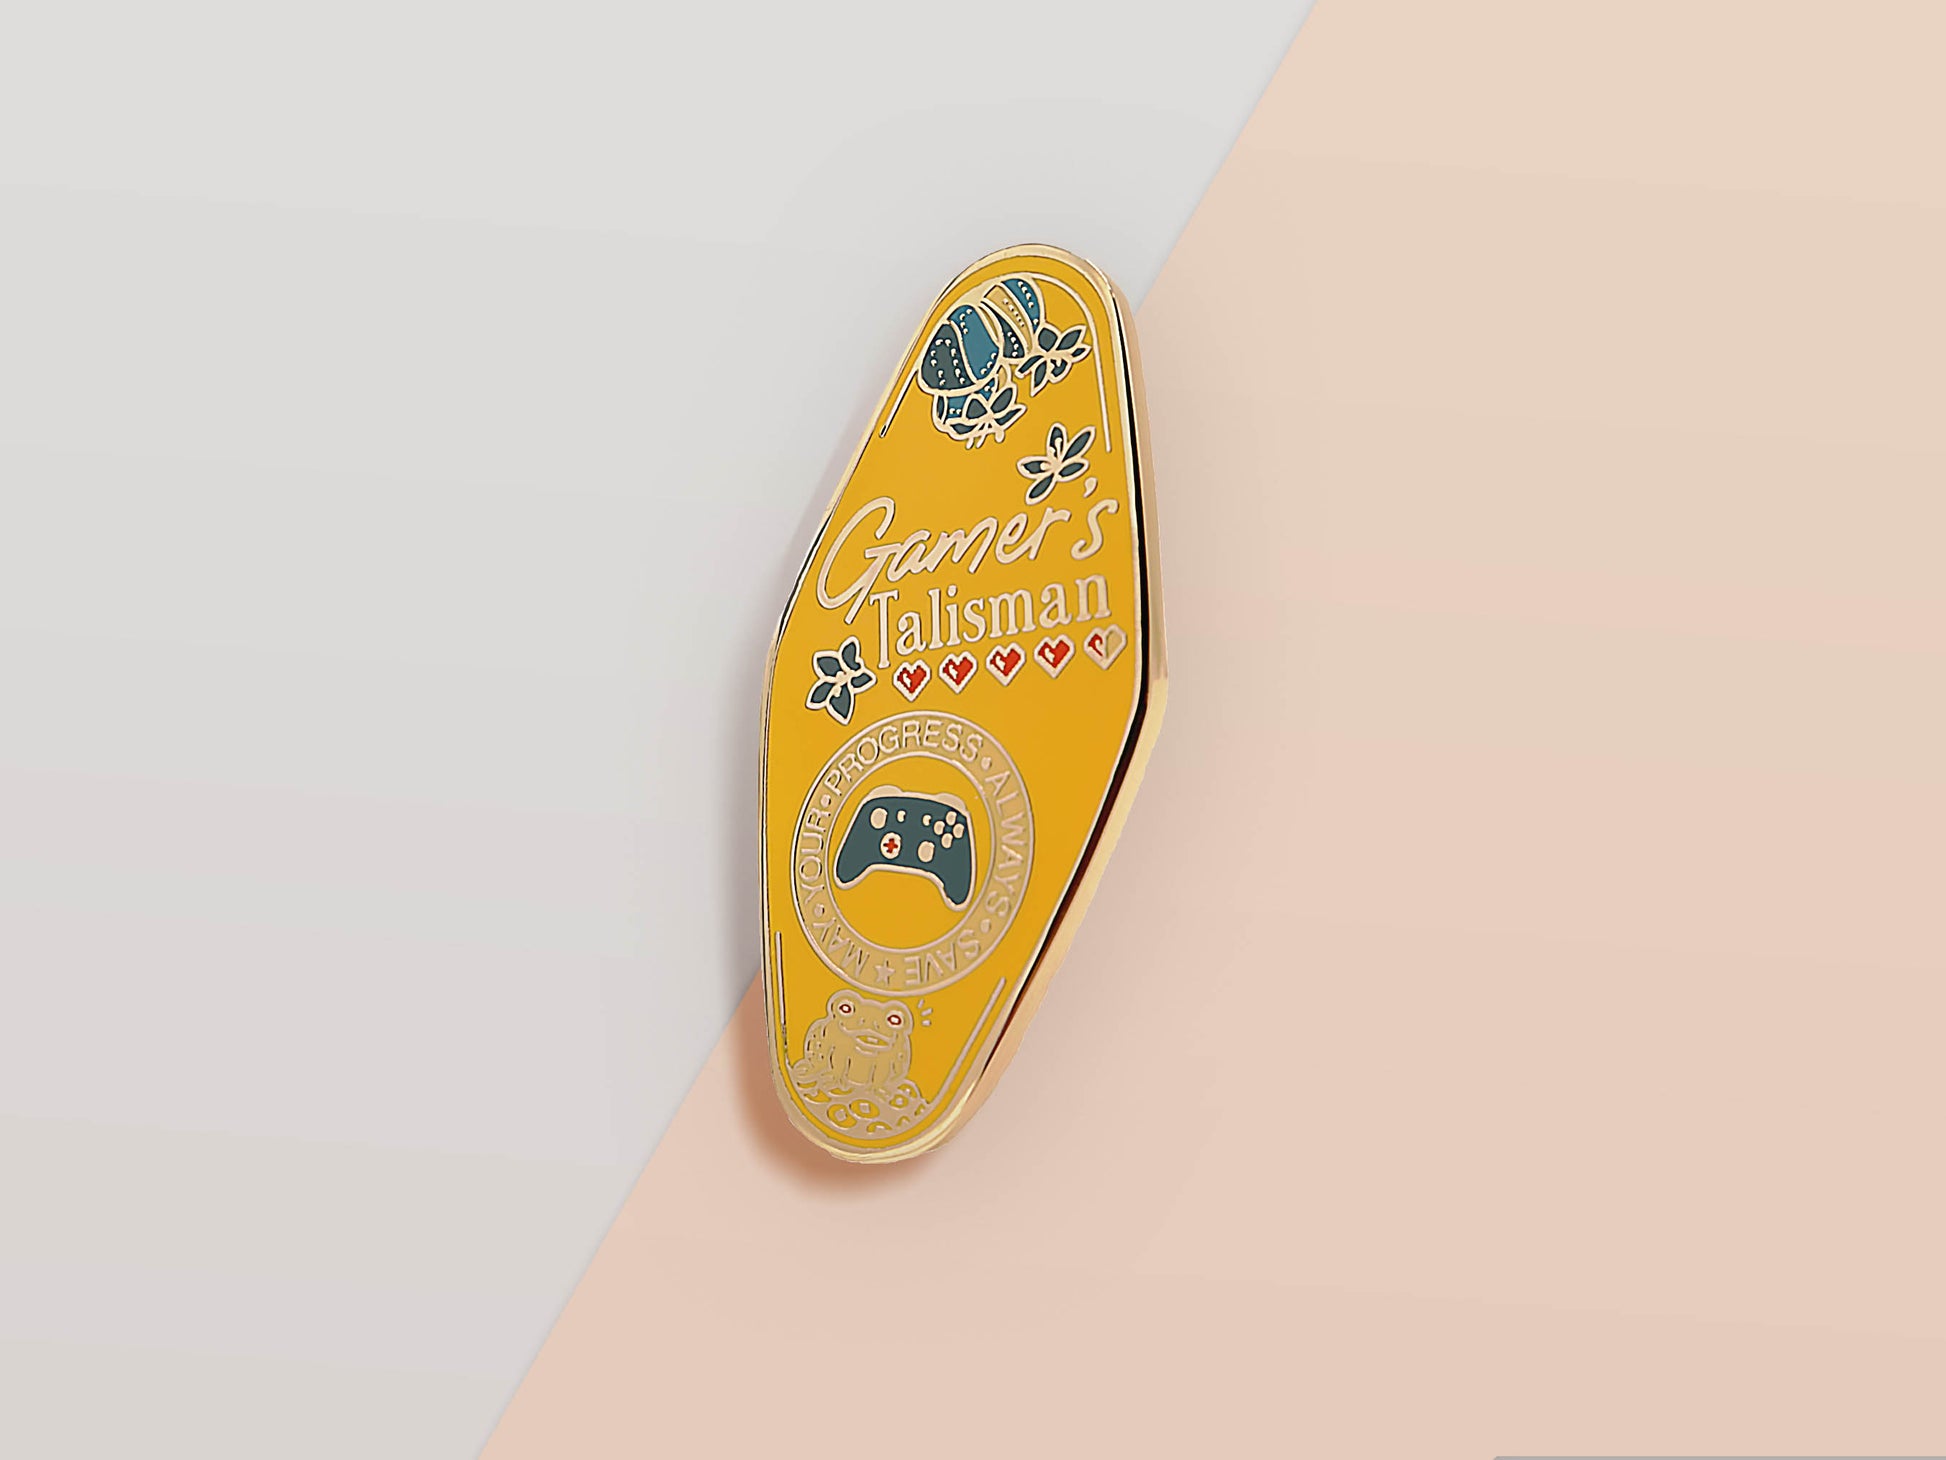 Gold Enamel Talisman Pin with yellow design and the words Gamer's Talisman, May Your Progress Always Save. The pins design includes a game console controller and health hearts, A jin Chan money toad, as well as plants and crystals.